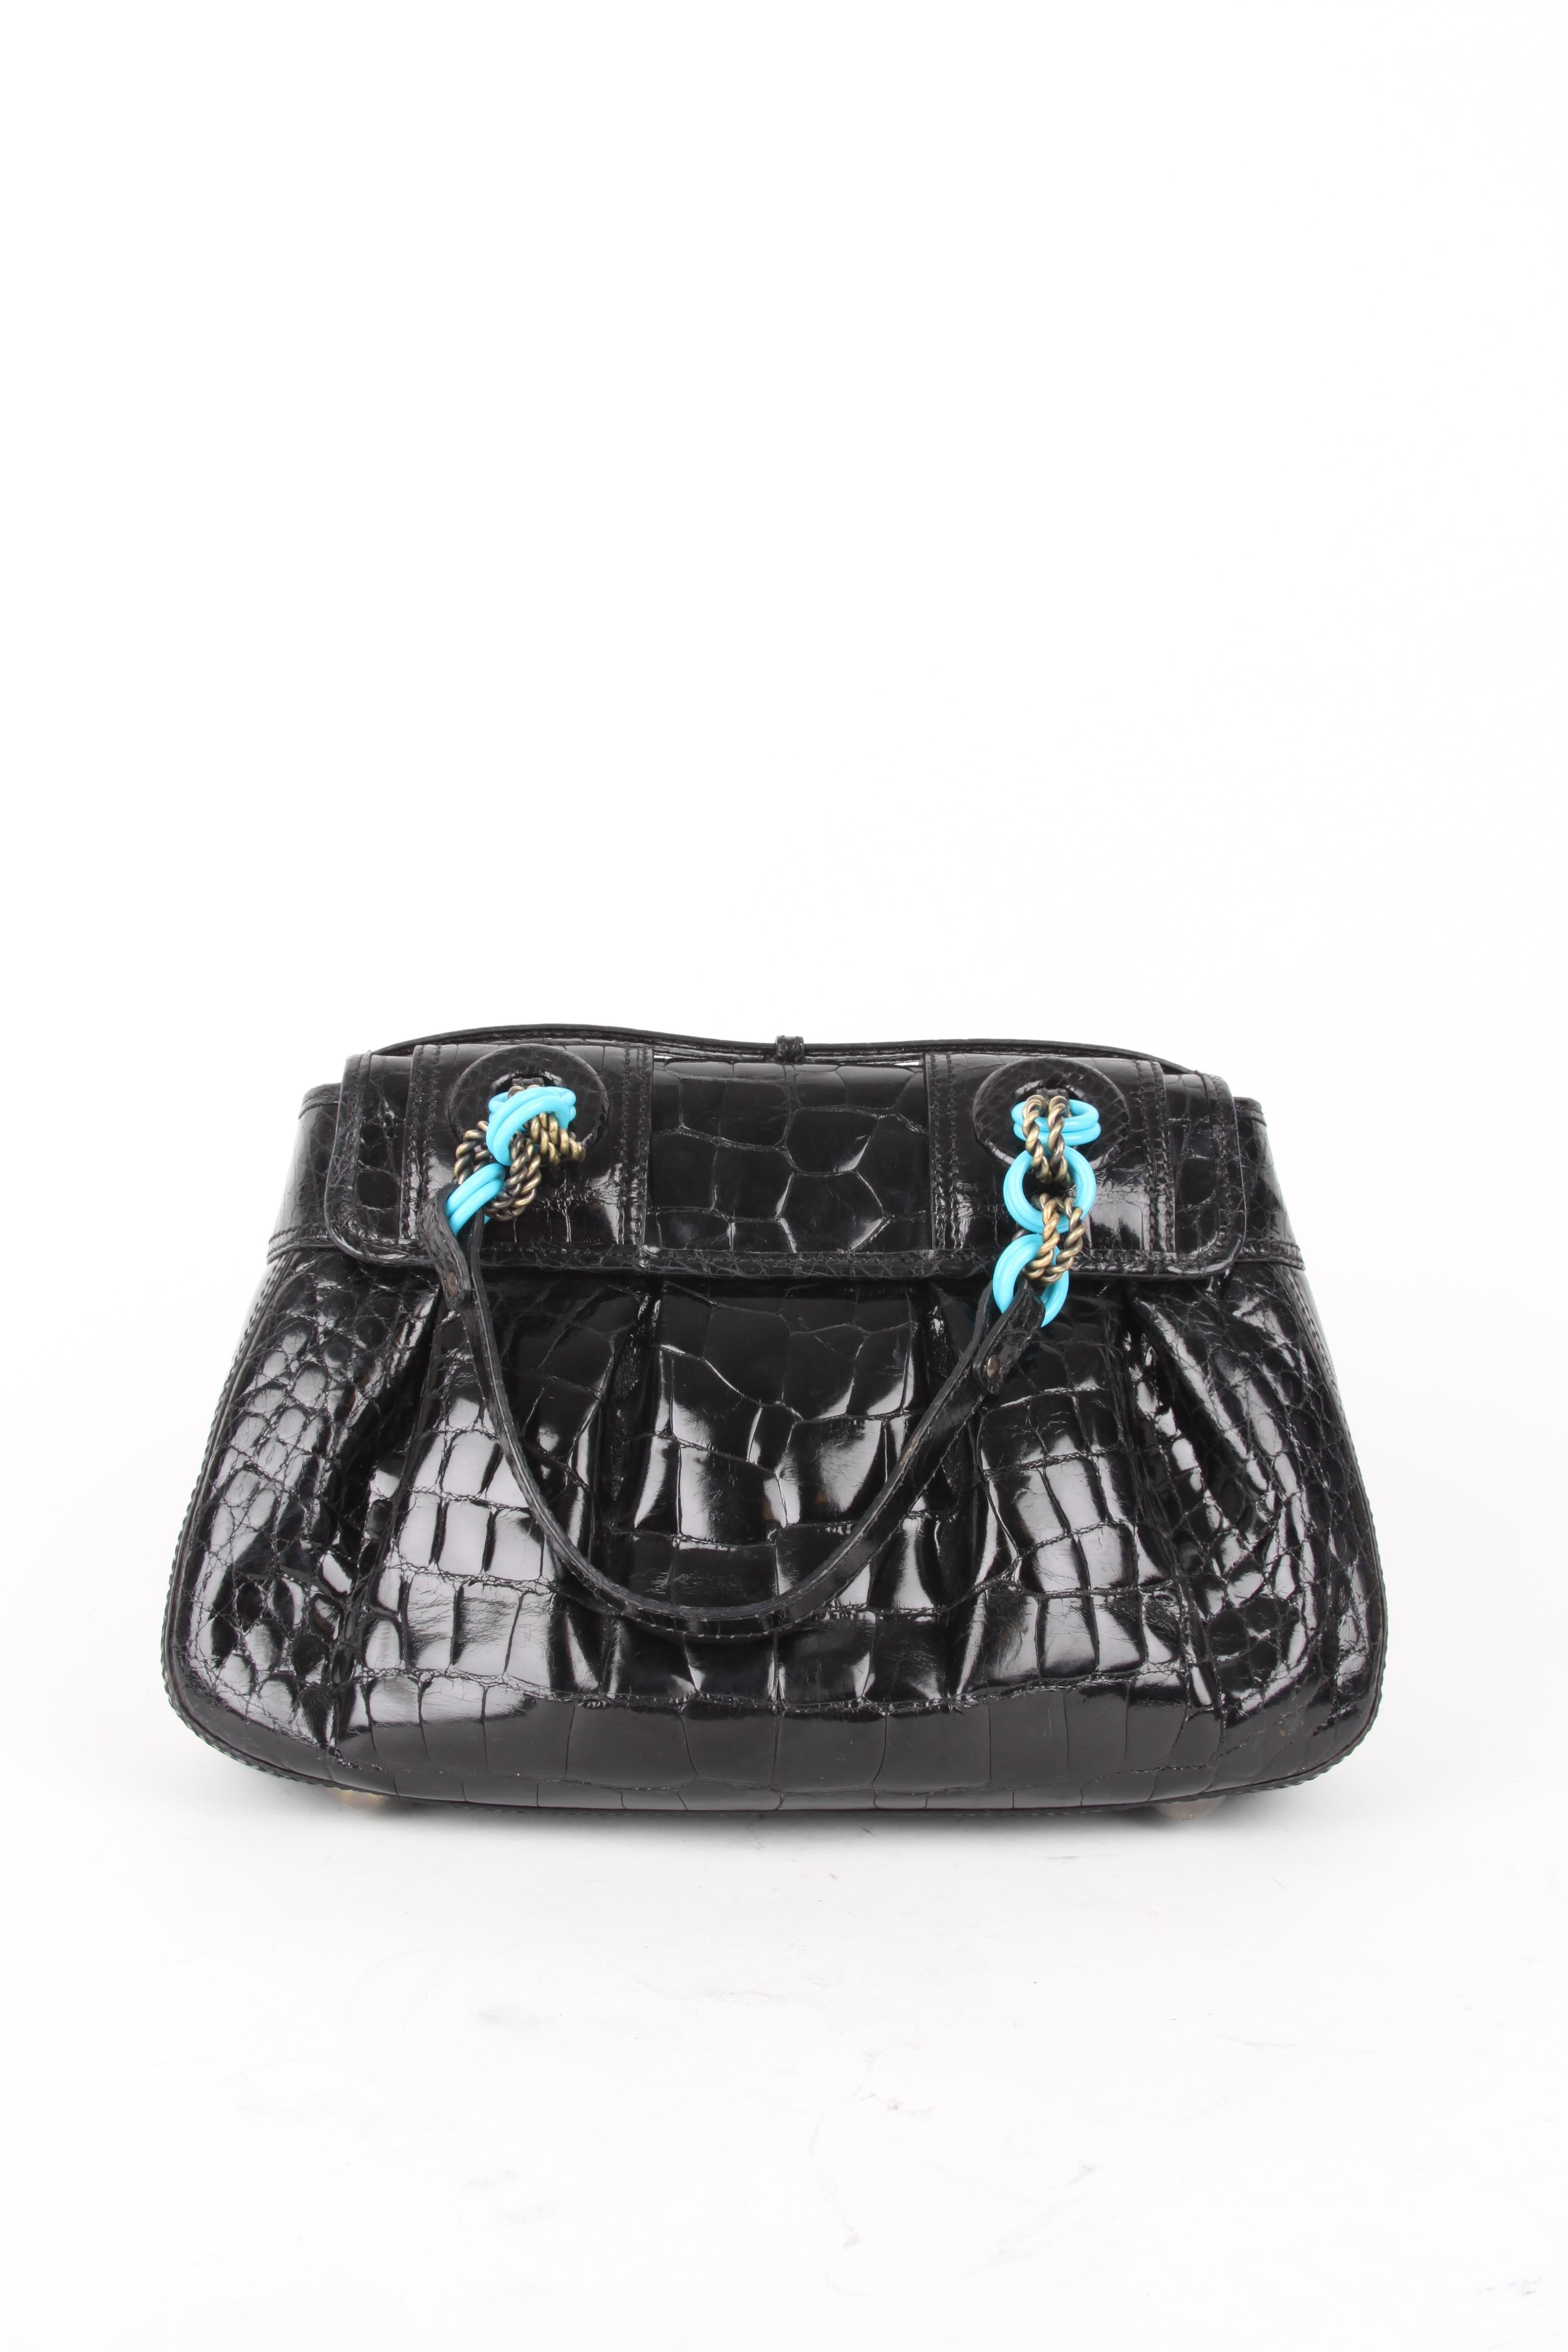 Women's or Men's   Fendi S/S 2006 Black  Leather B-Bag With Turquoise Chain Straps  For Sale